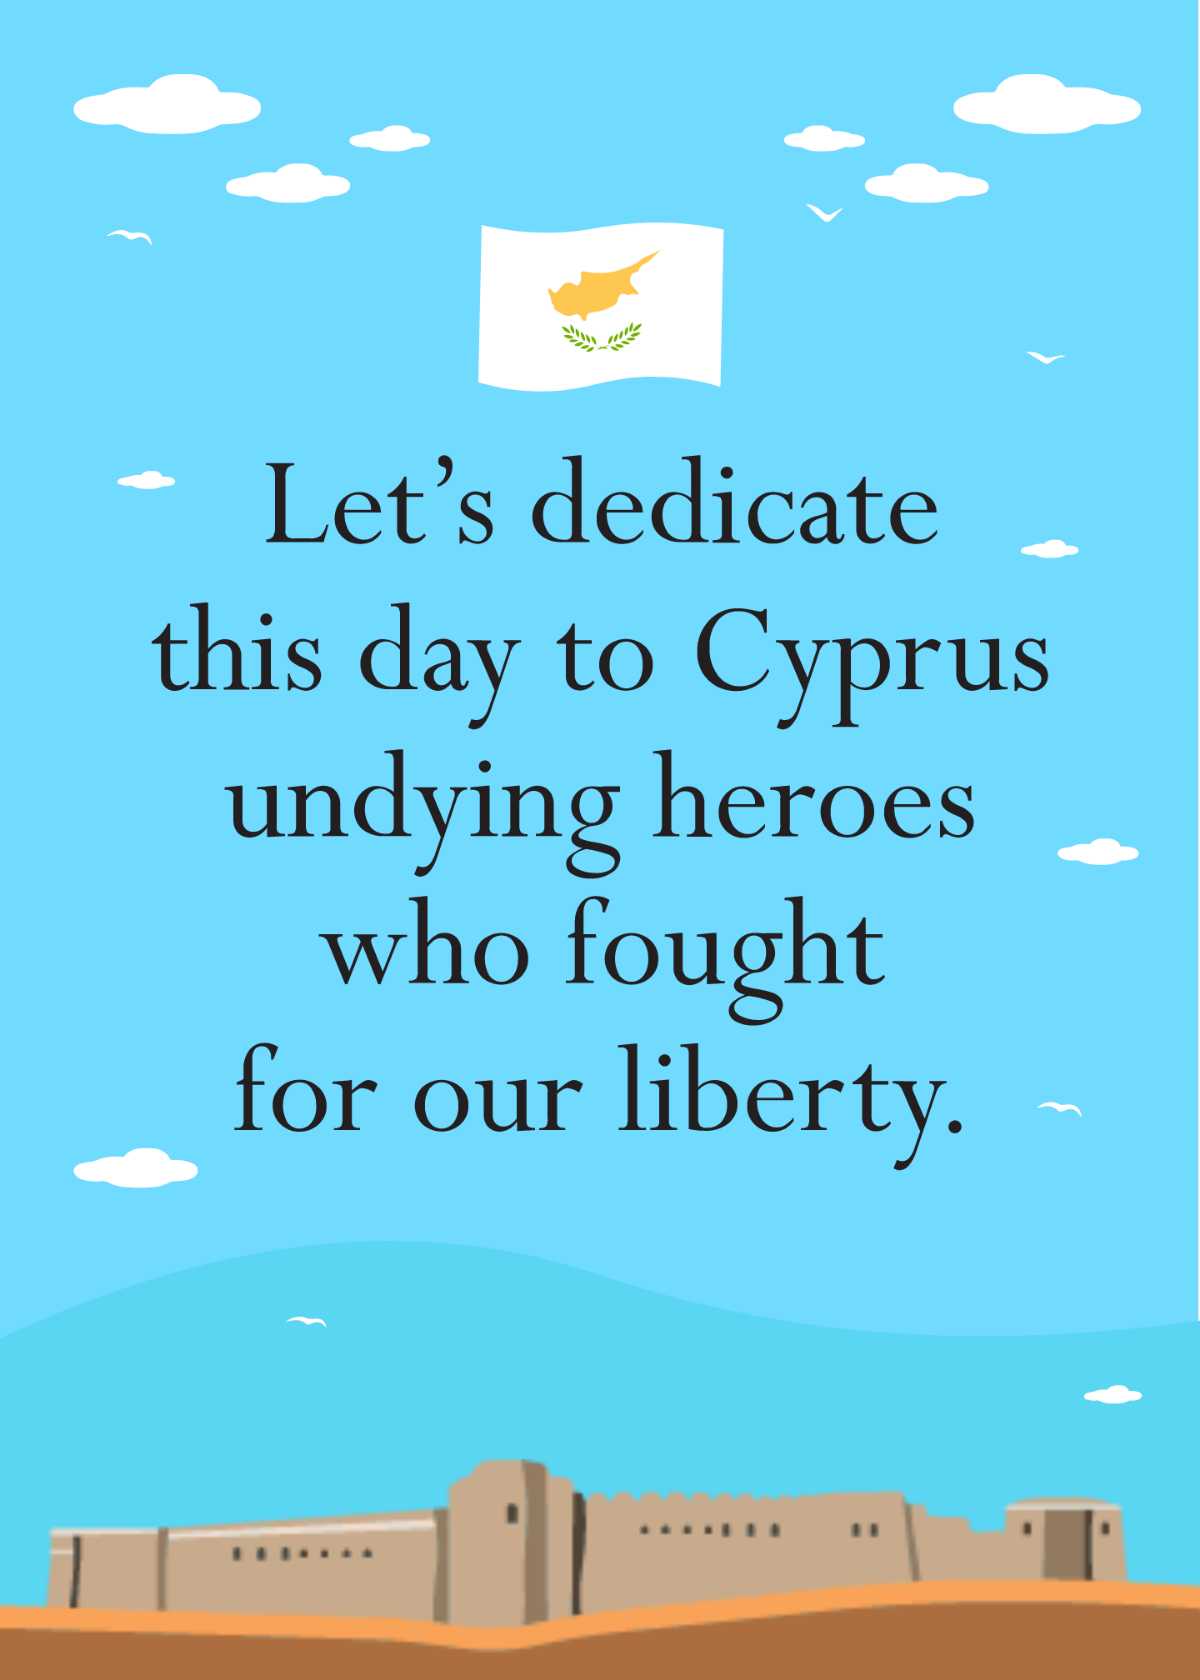 Cyprus National Day Message 